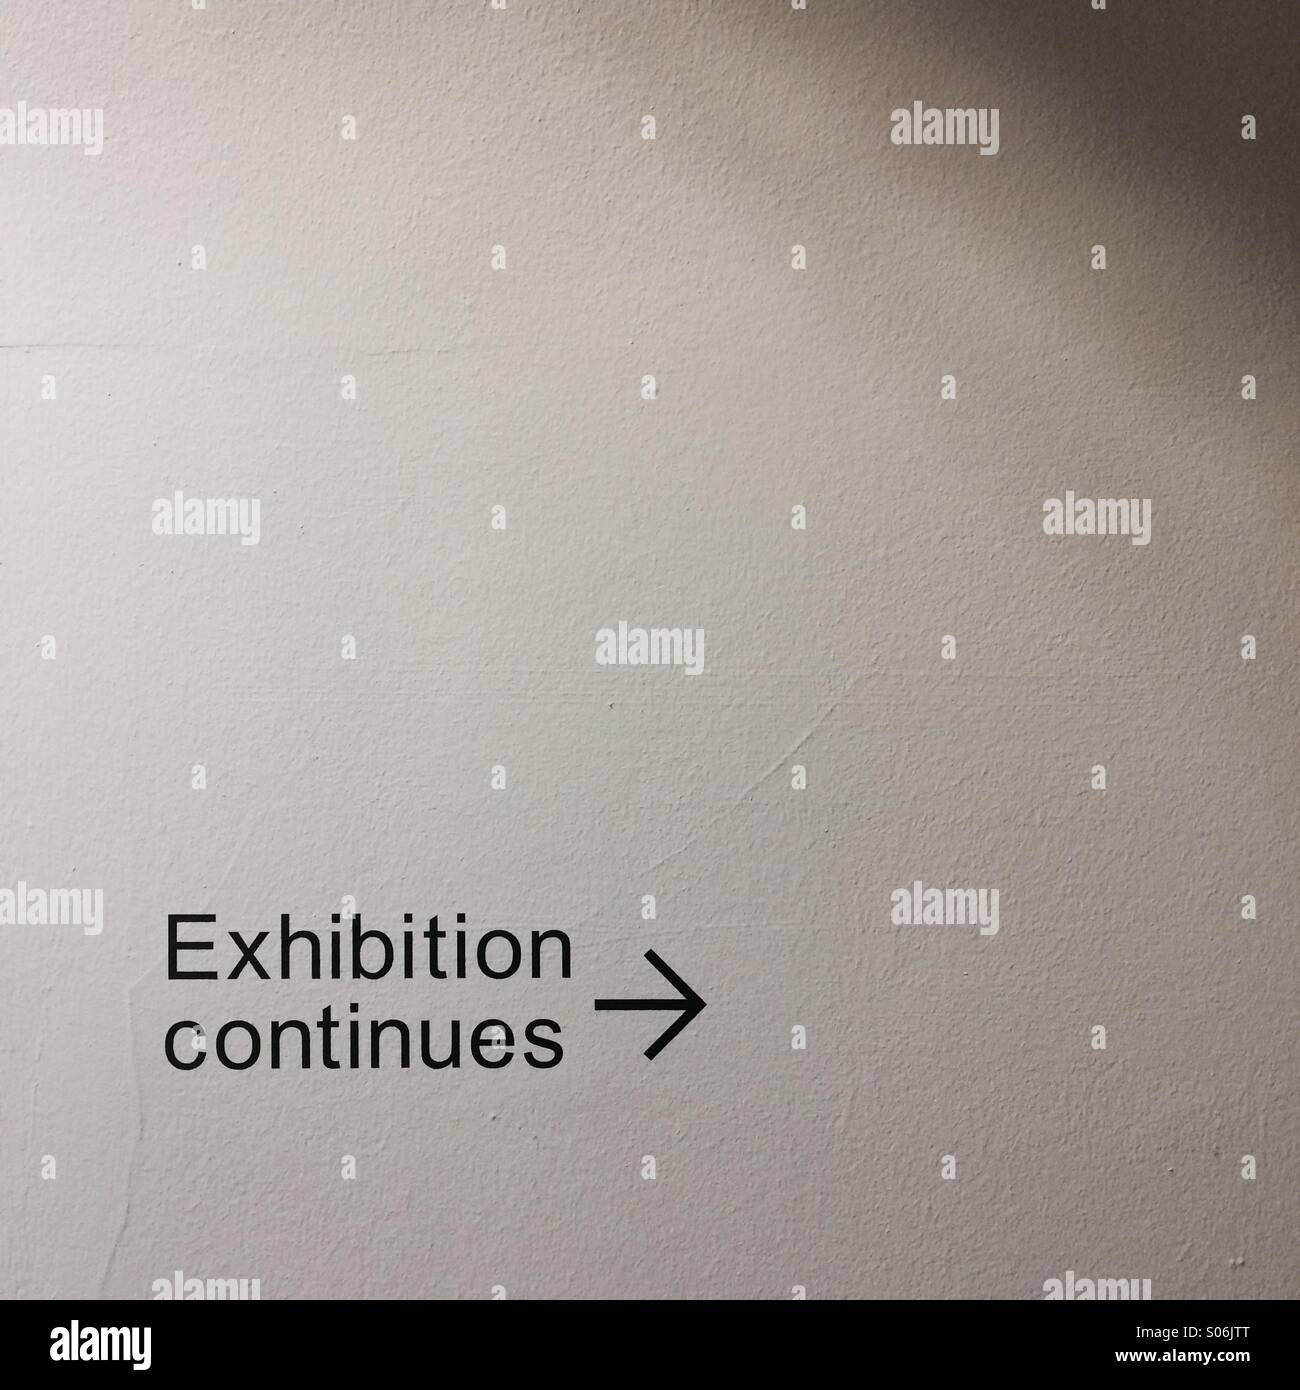 Exhibition continues signage Stock Photo